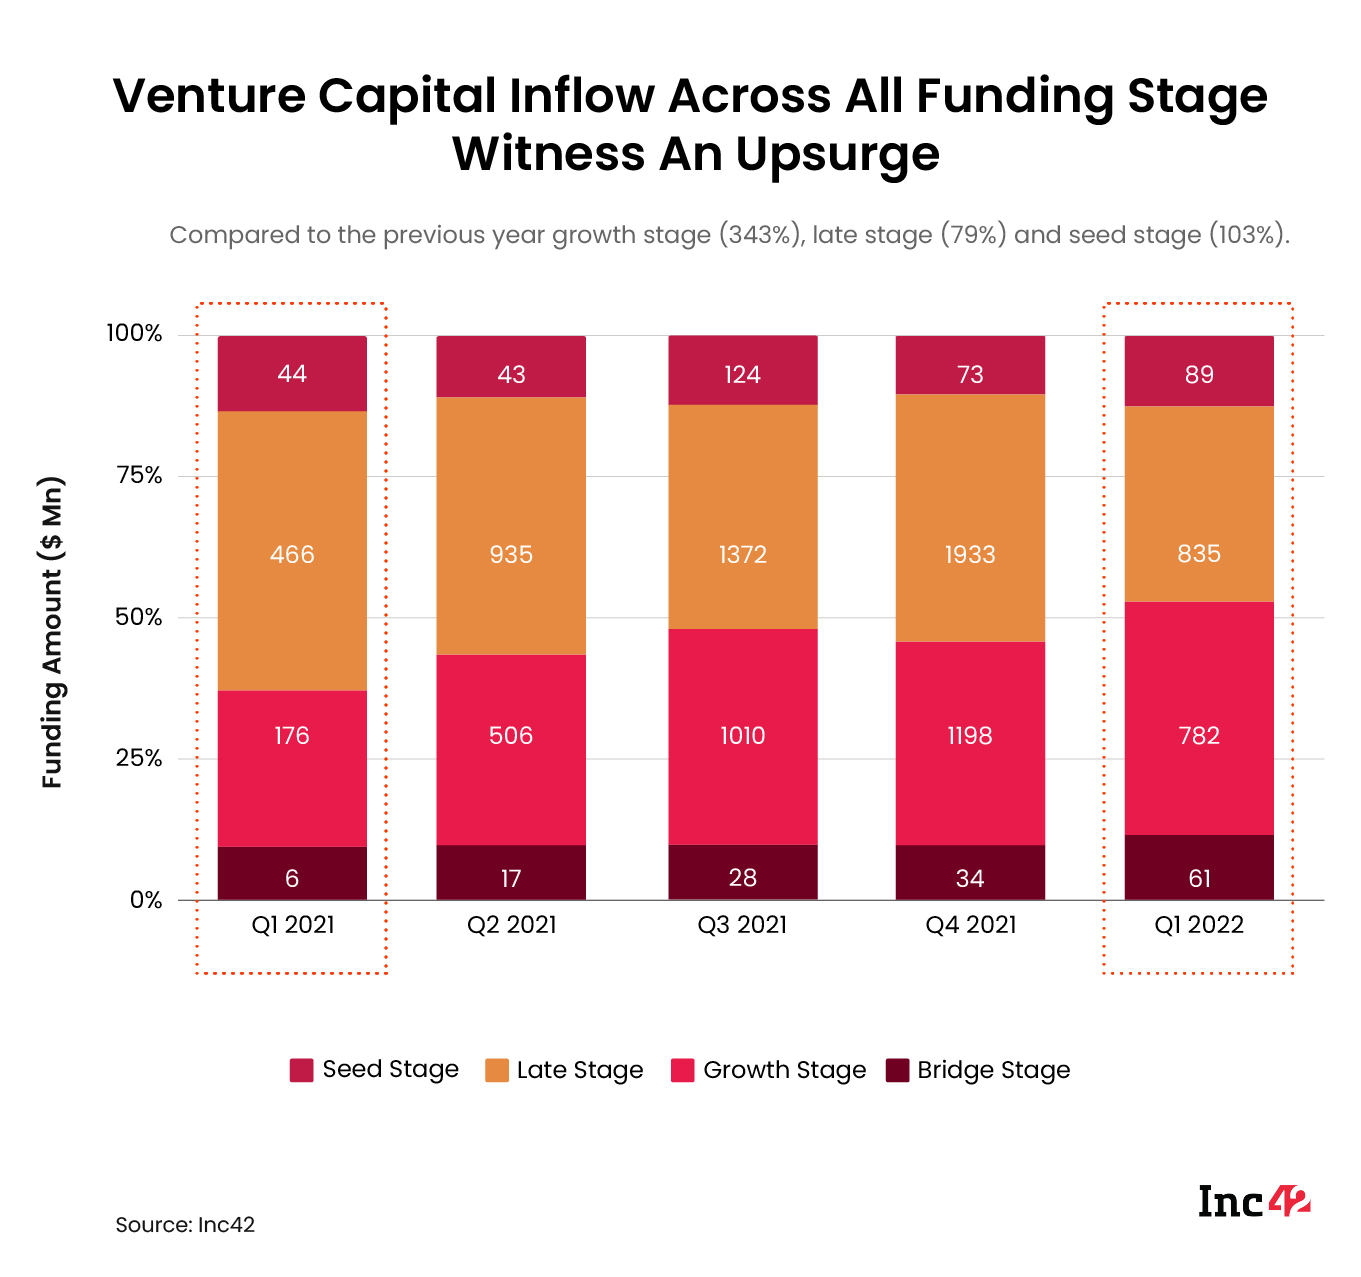 Venture Capital Inflow Across All Funding Stage Witness An Upsurge